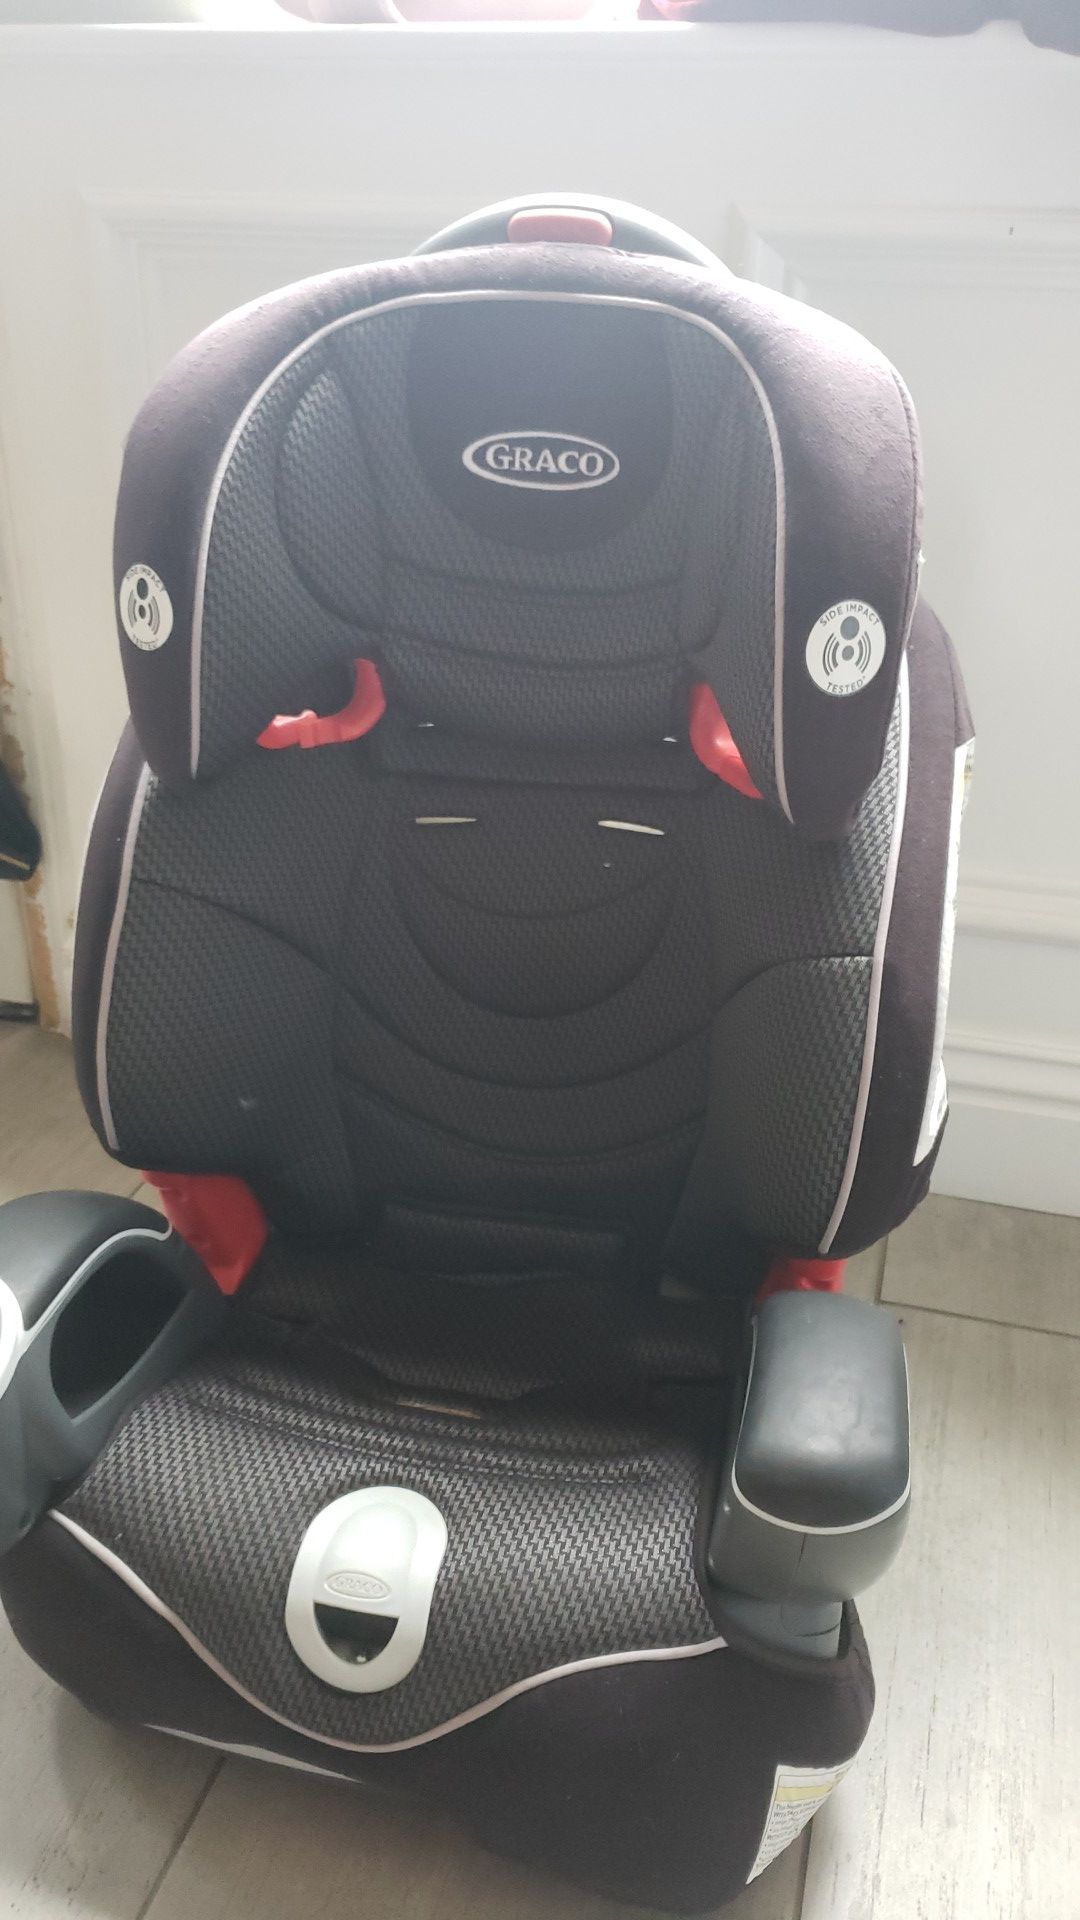 Graco high back booster seat